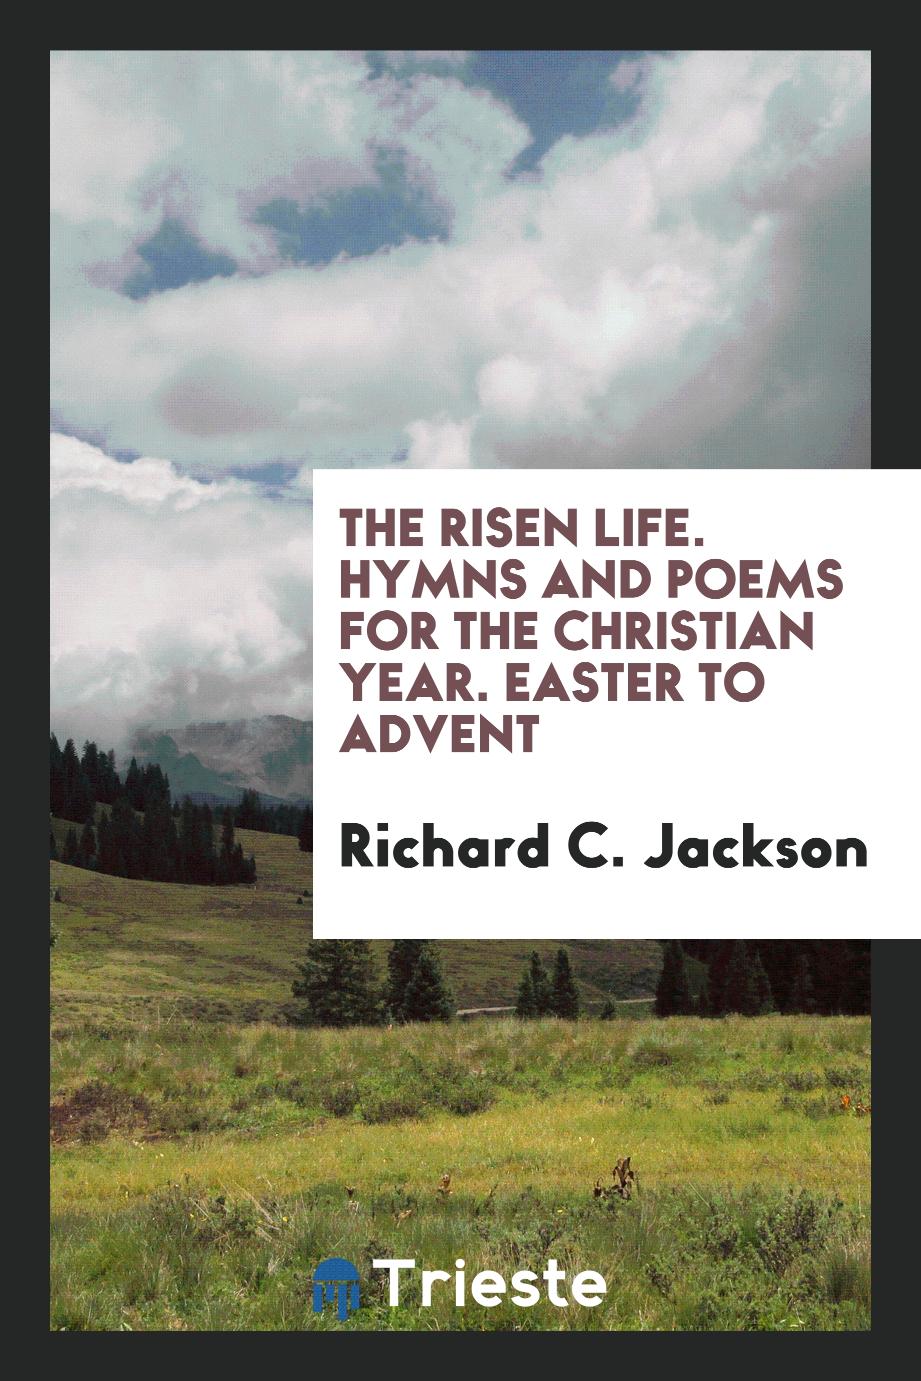 The risen life. Hymns and poems for the Christian year. Easter to Advent